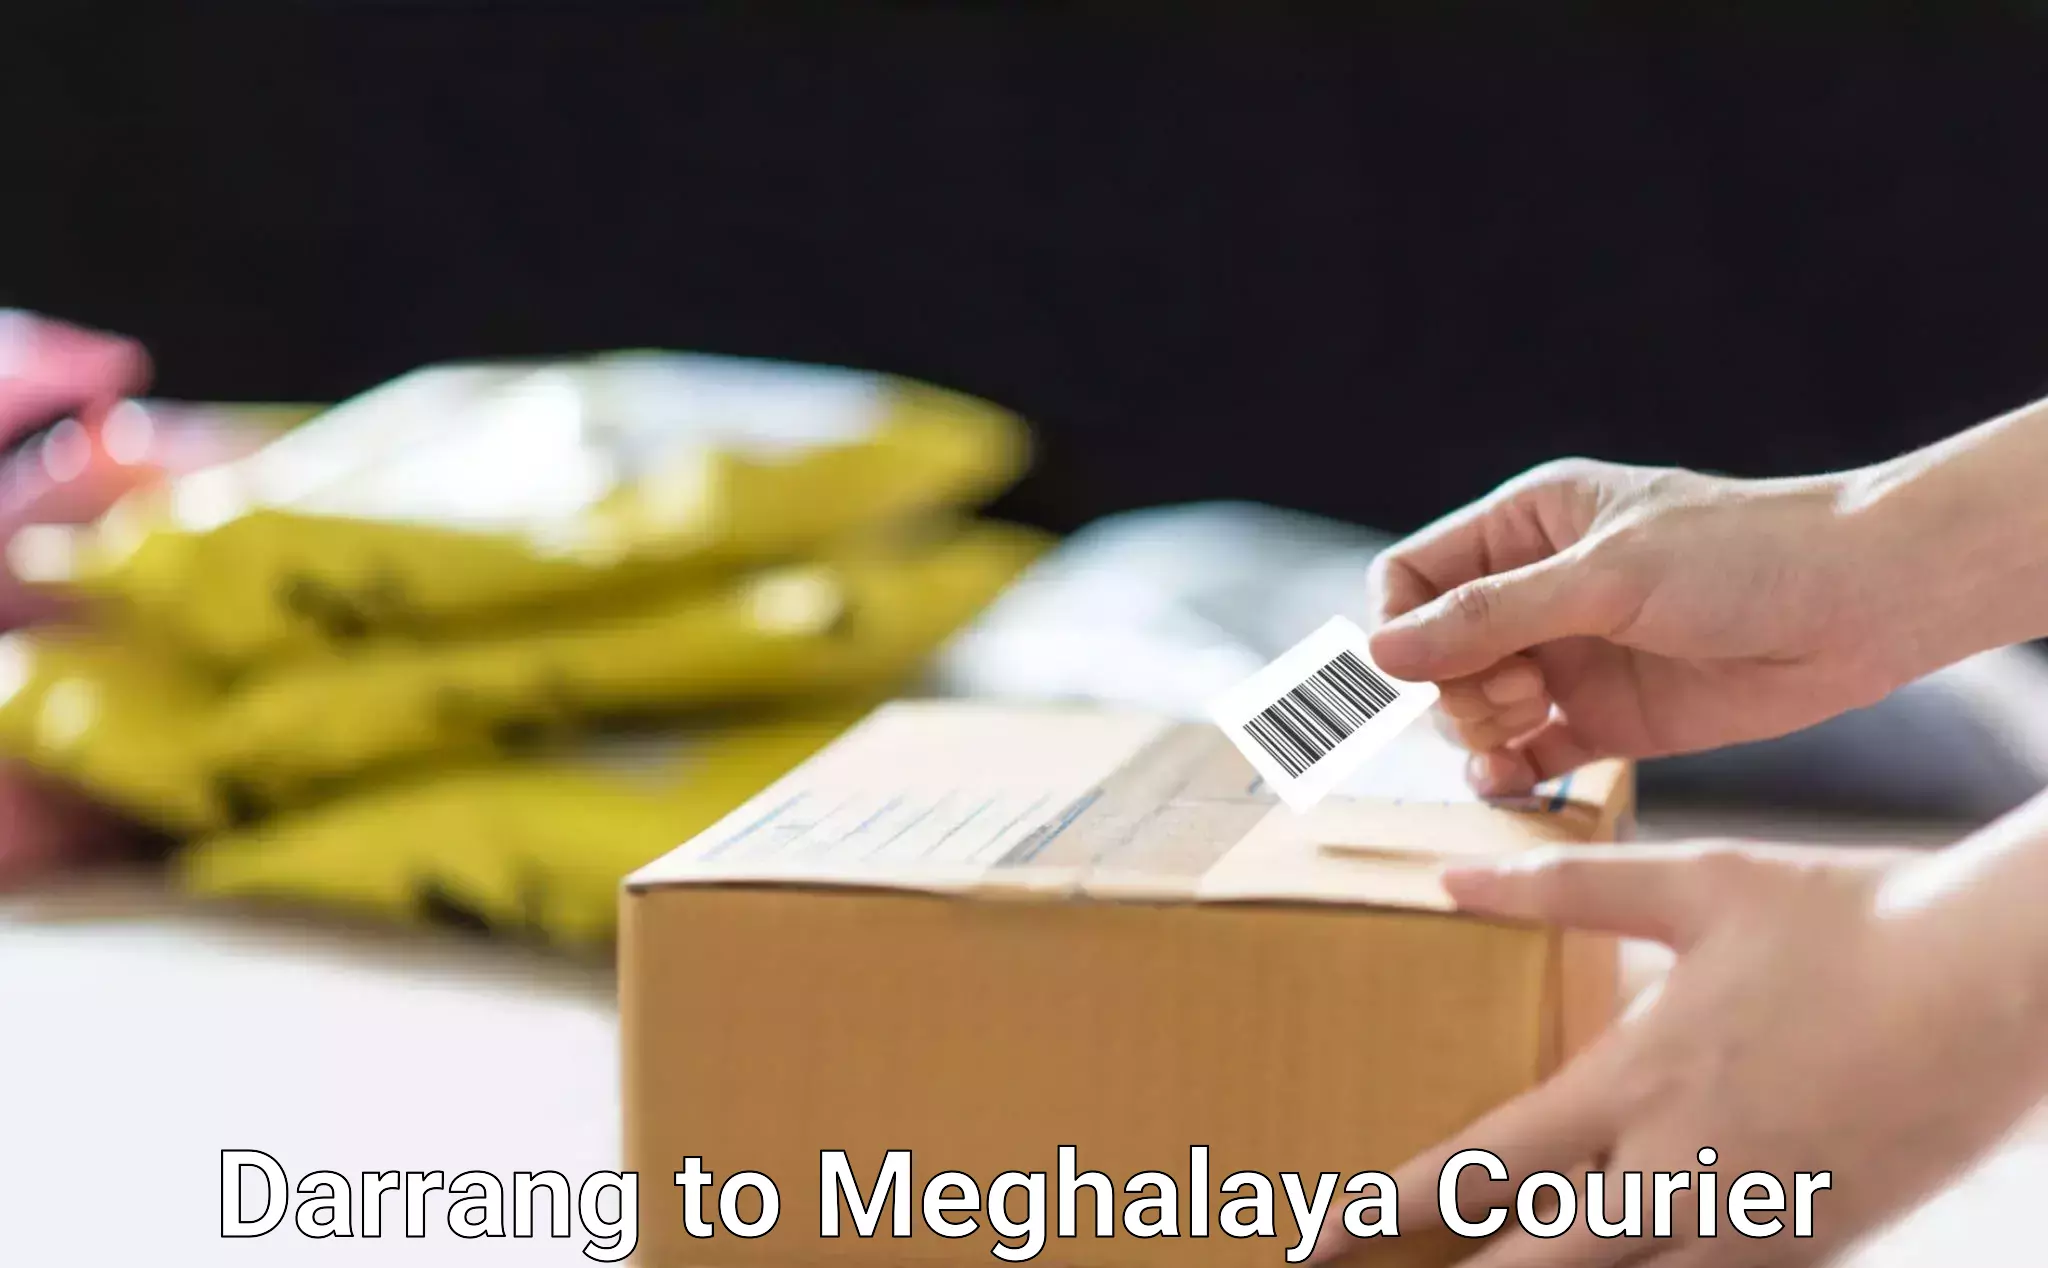 User-friendly delivery service Darrang to Meghalaya